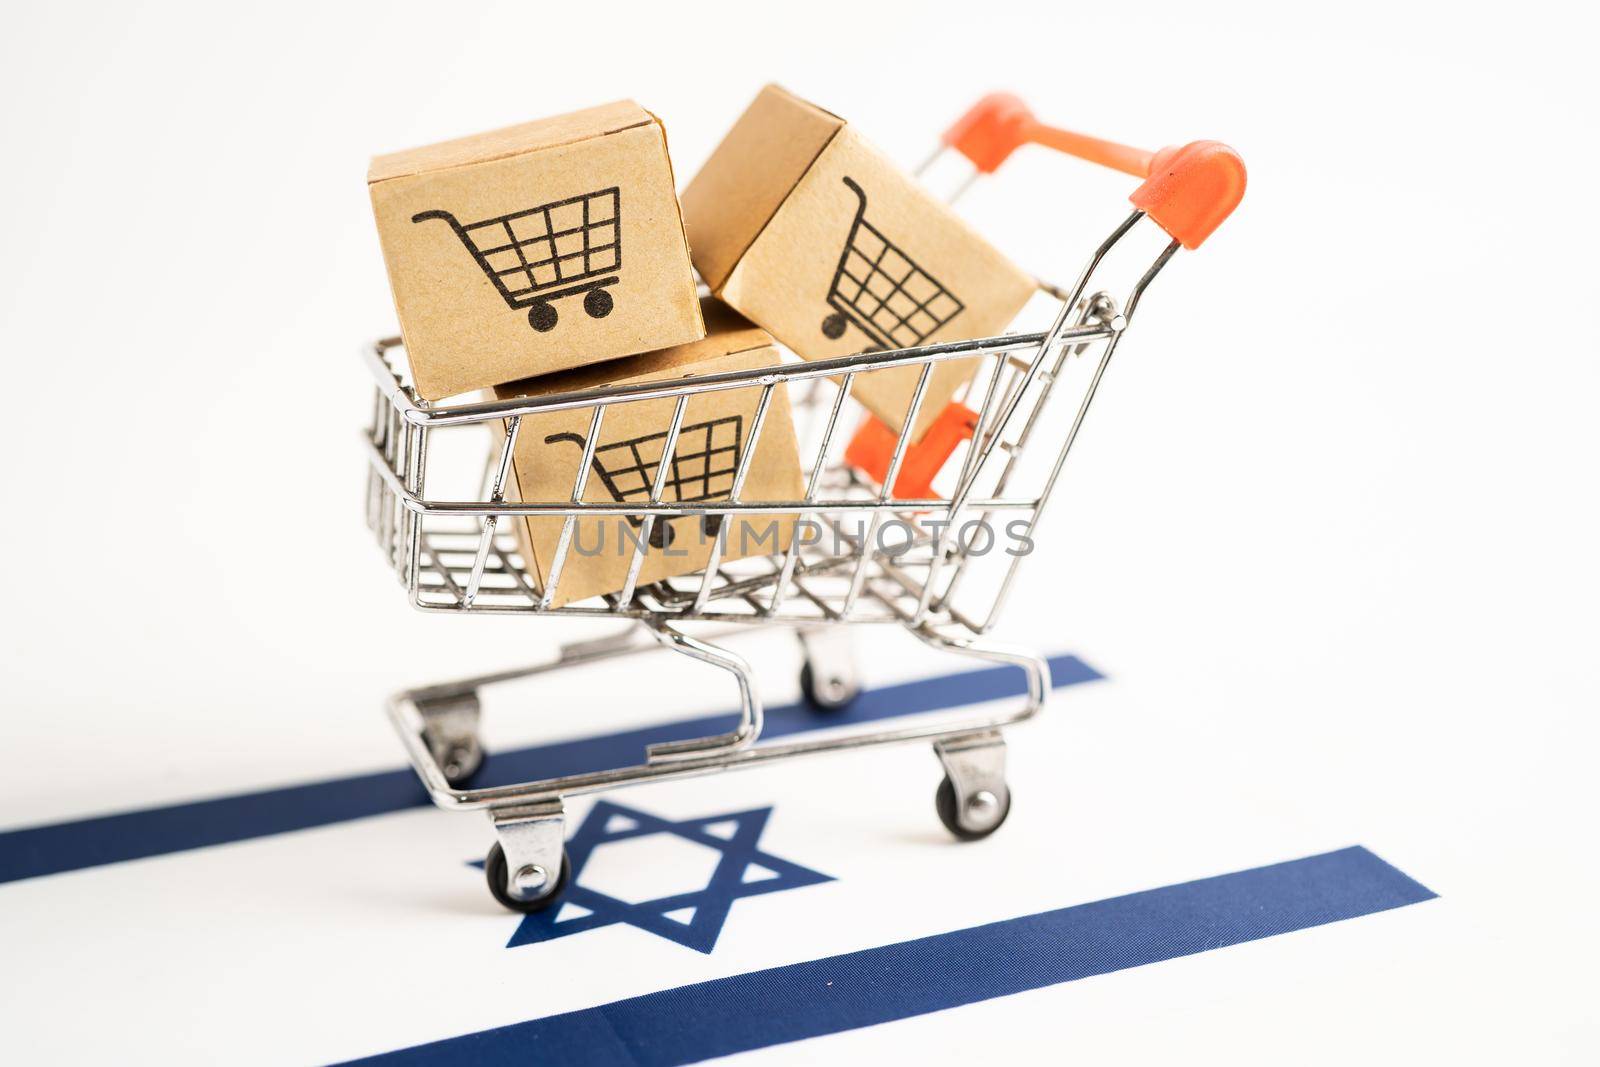 Box with shopping cart logo and Israel flag, Import Export Shopping online or eCommerce finance delivery service store product shipping, trade, supplier concept. by pamai